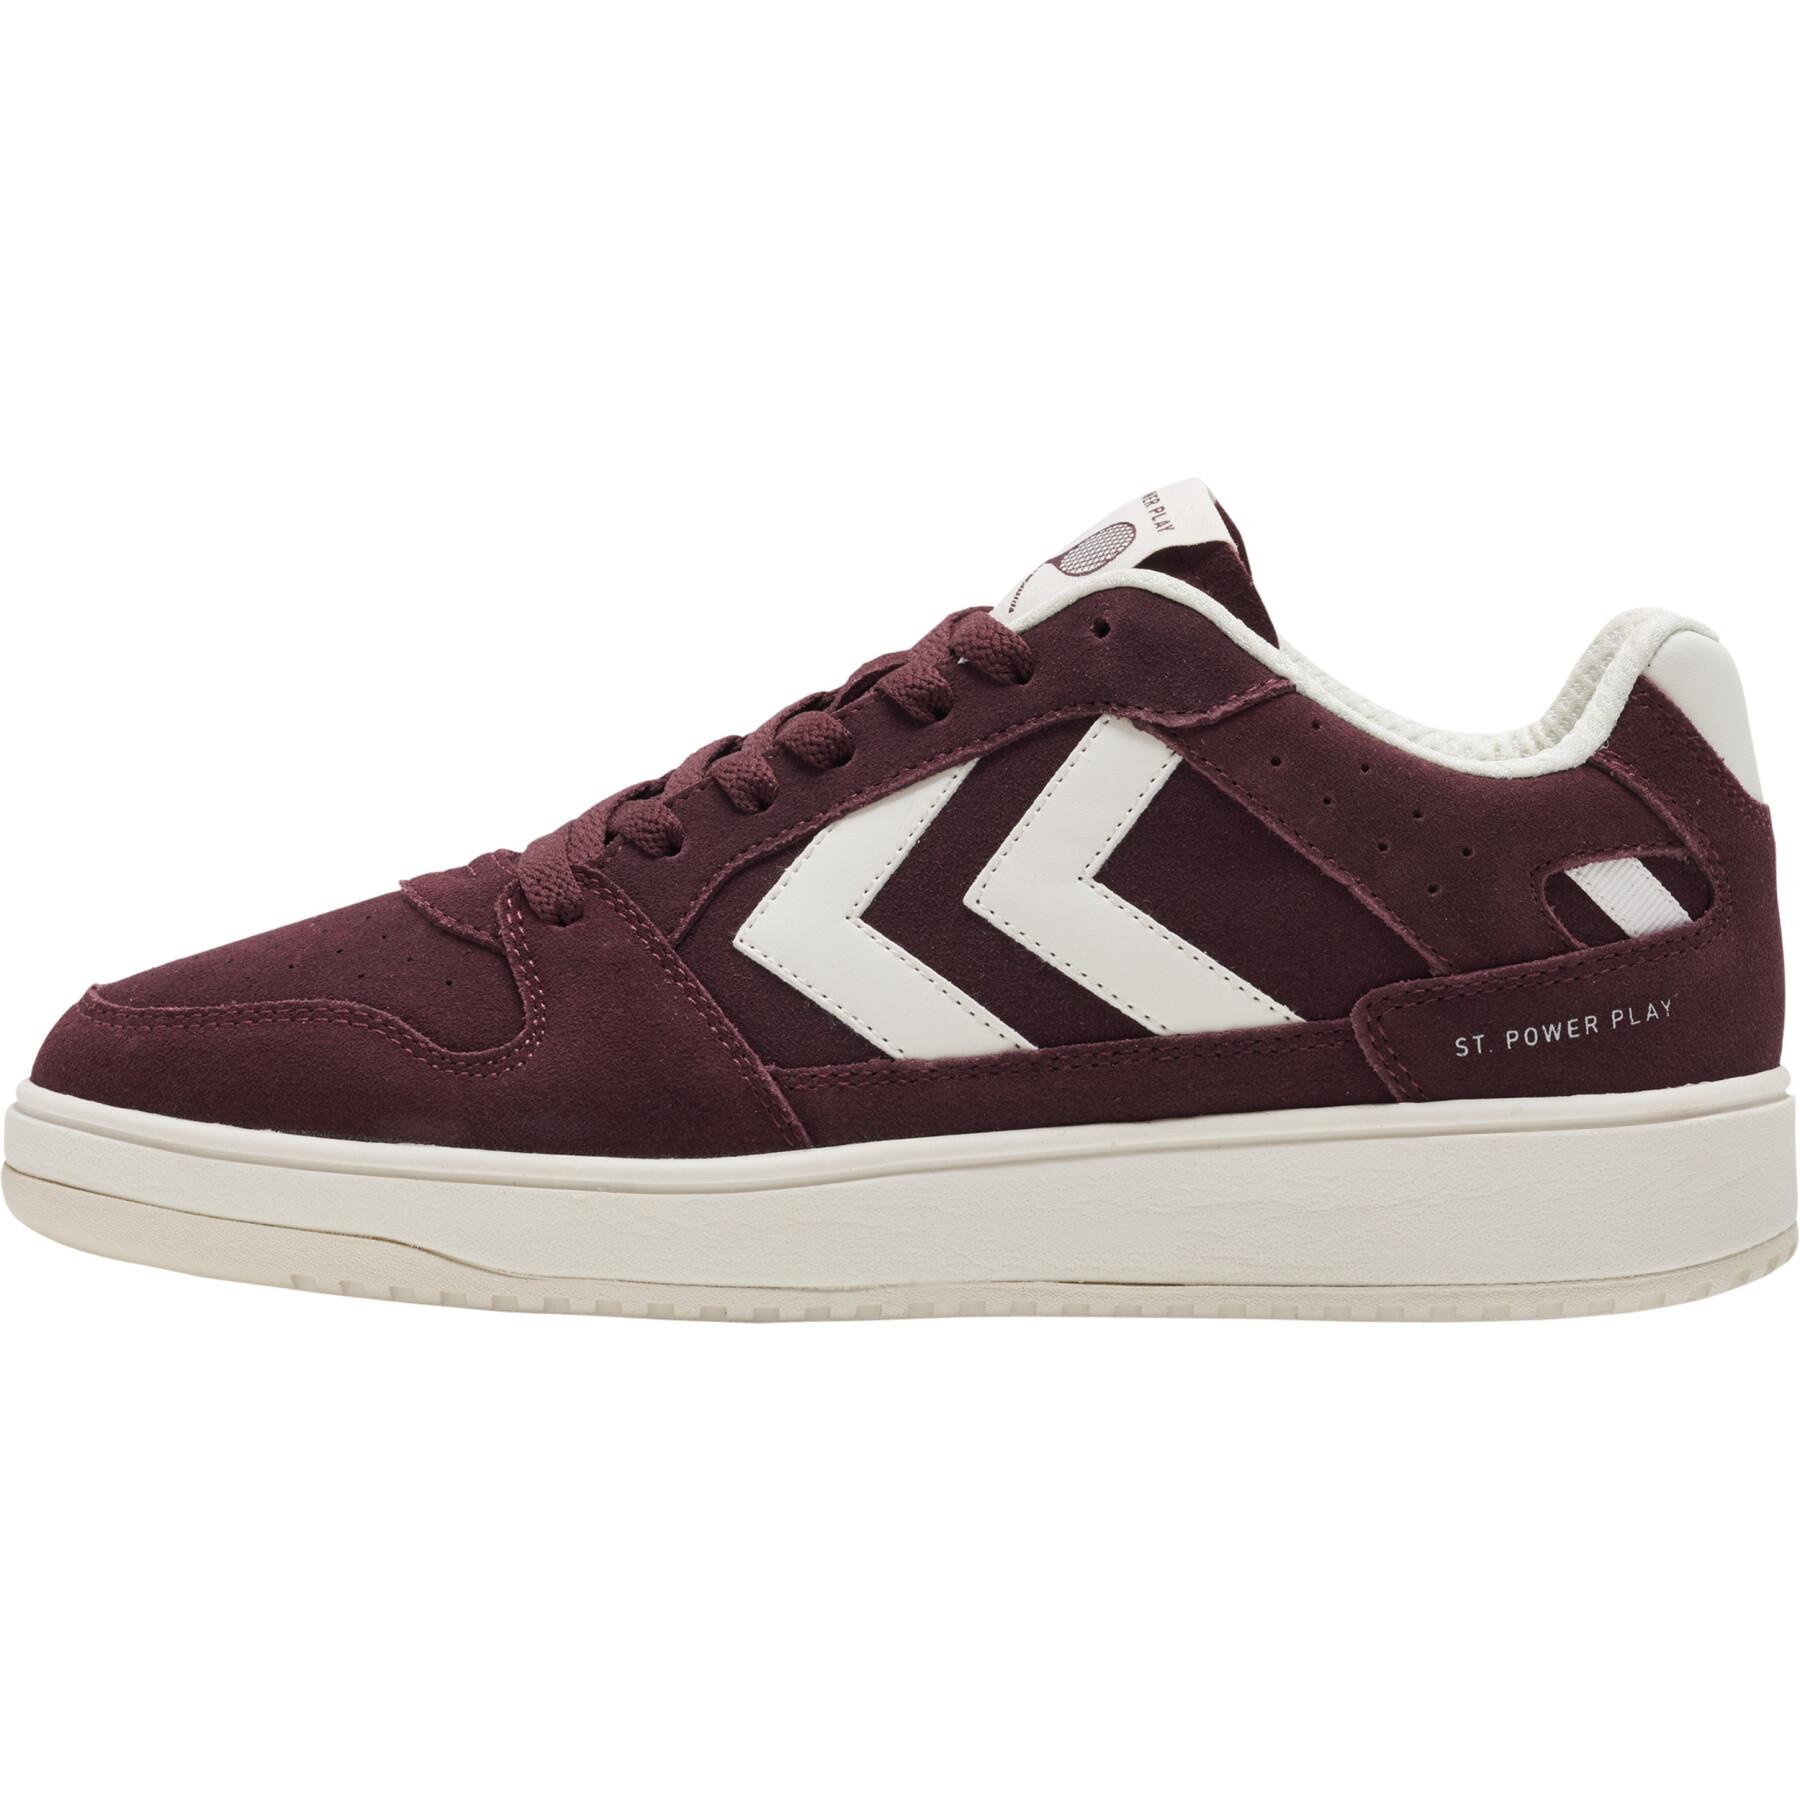 Sneakers Hummel St. Power Play Hummel - Suede - - Brands Lifestyle